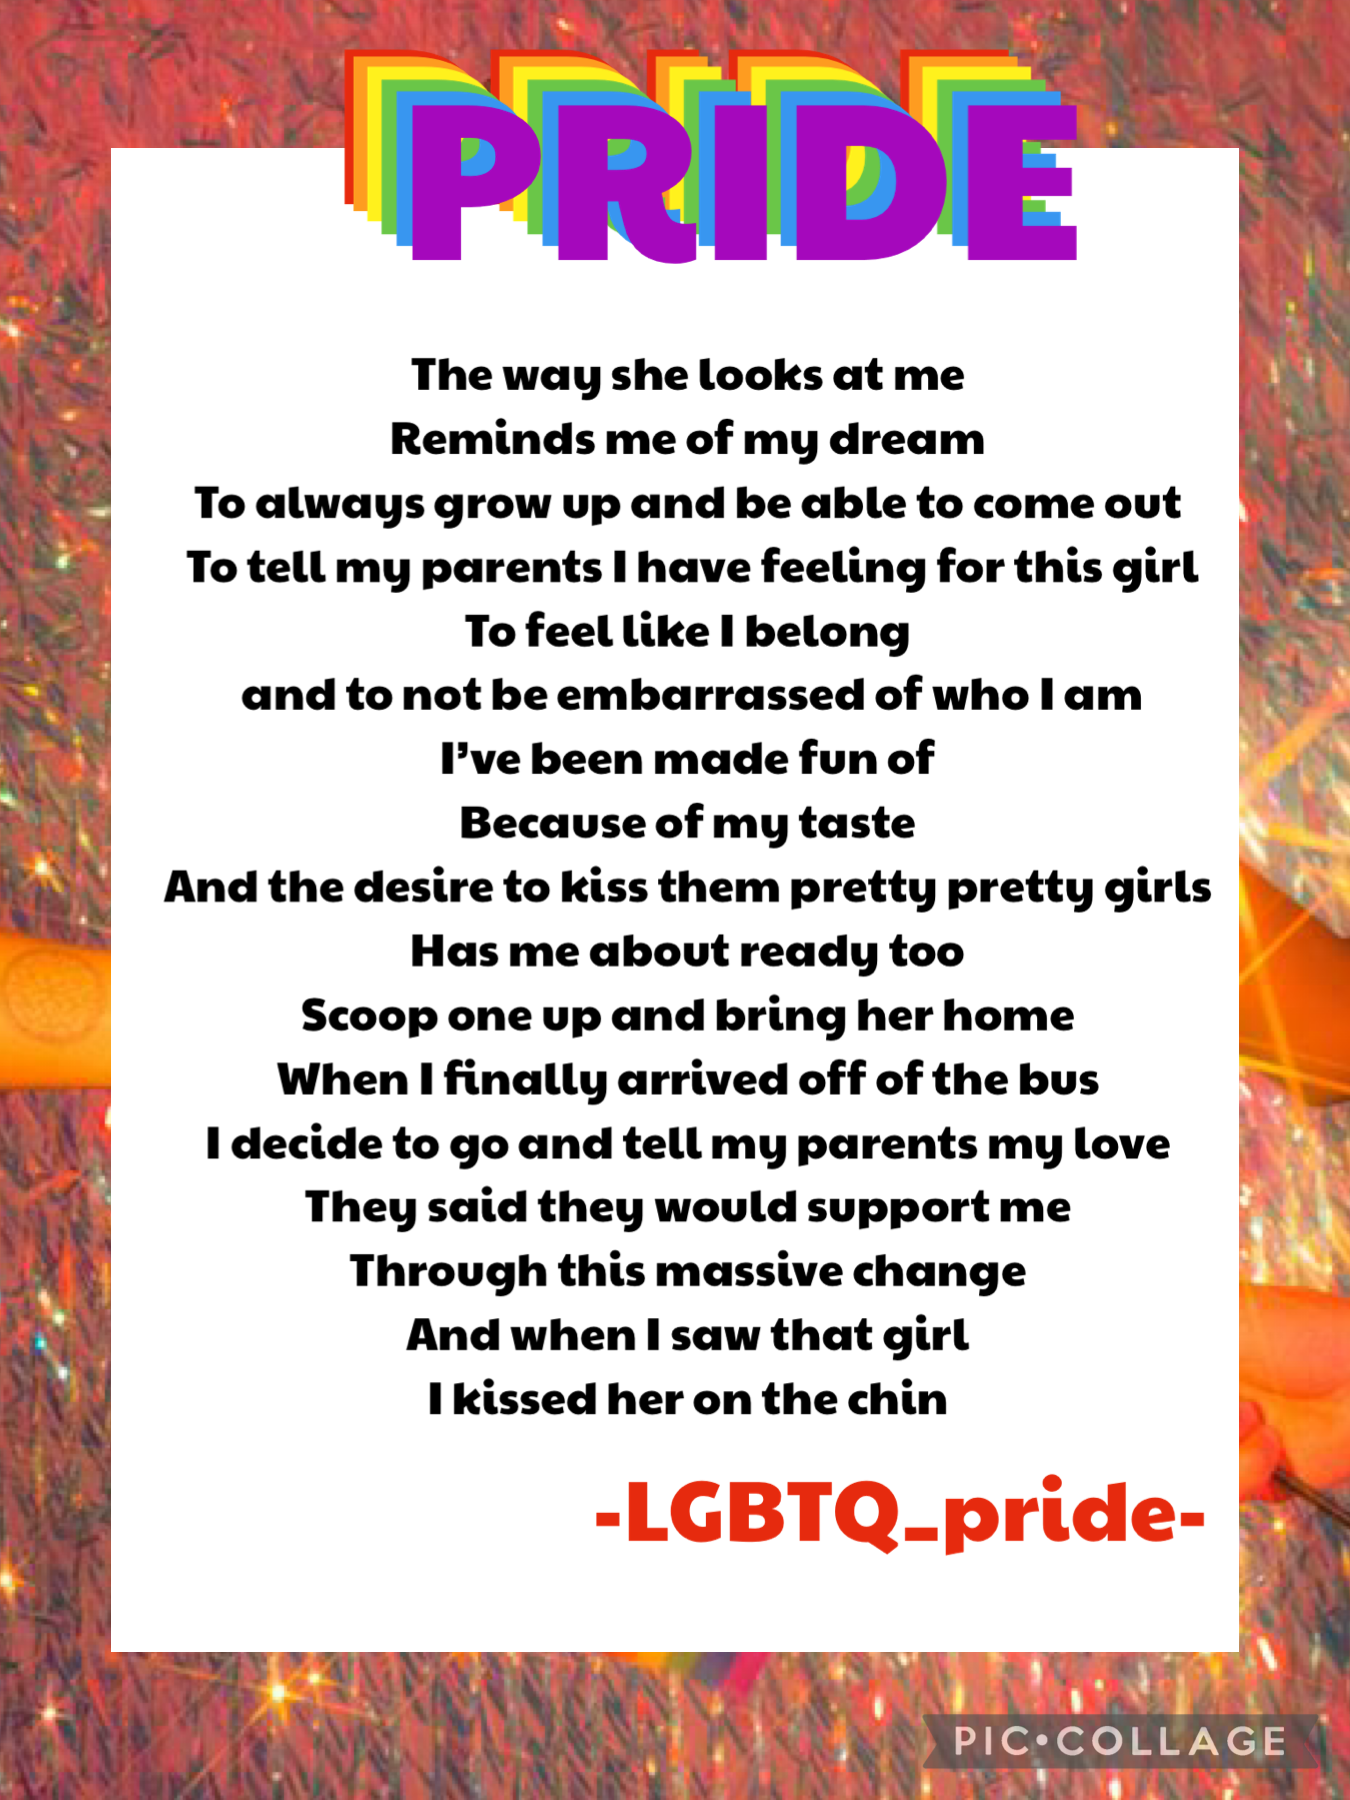 🌈TAP🌈
Here is the poem to go along with the collage! I hope you enjoy it! I hope I can help the LGBTQ community and inspire people! (6/2/21)